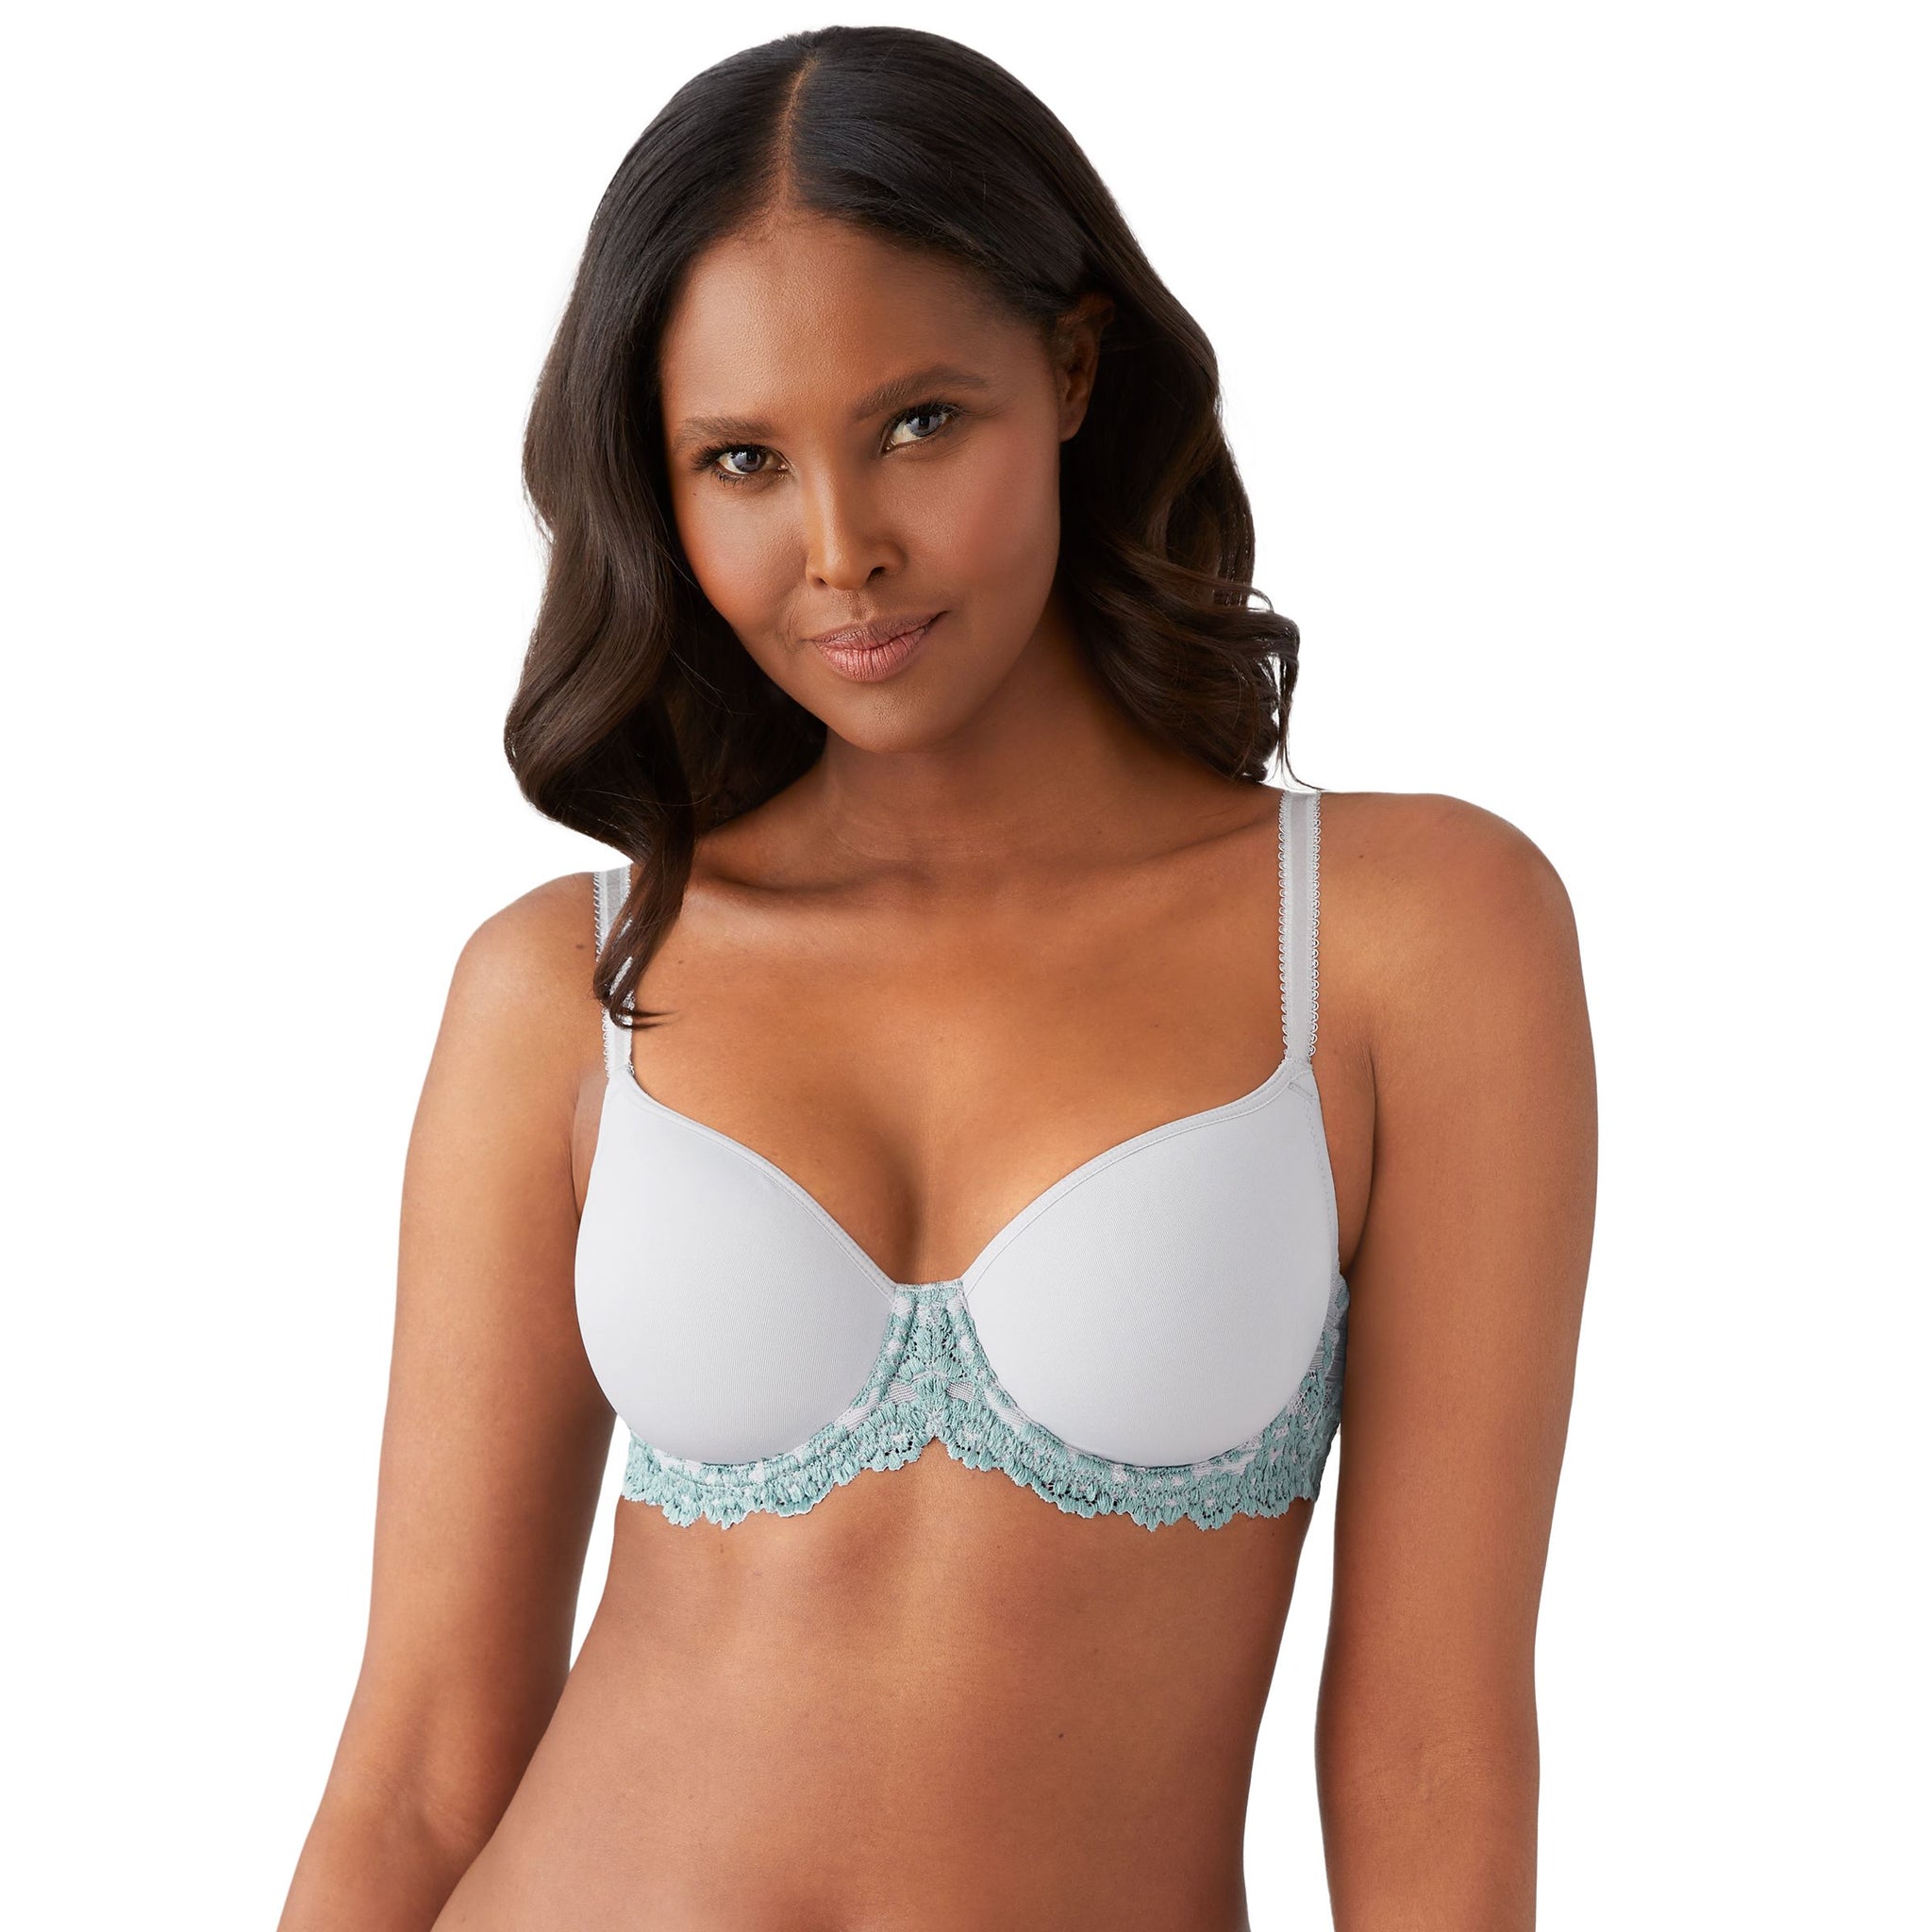 Wacoal Embrace Lace Underwire Contour Bra, Naturally Nude/Ivory